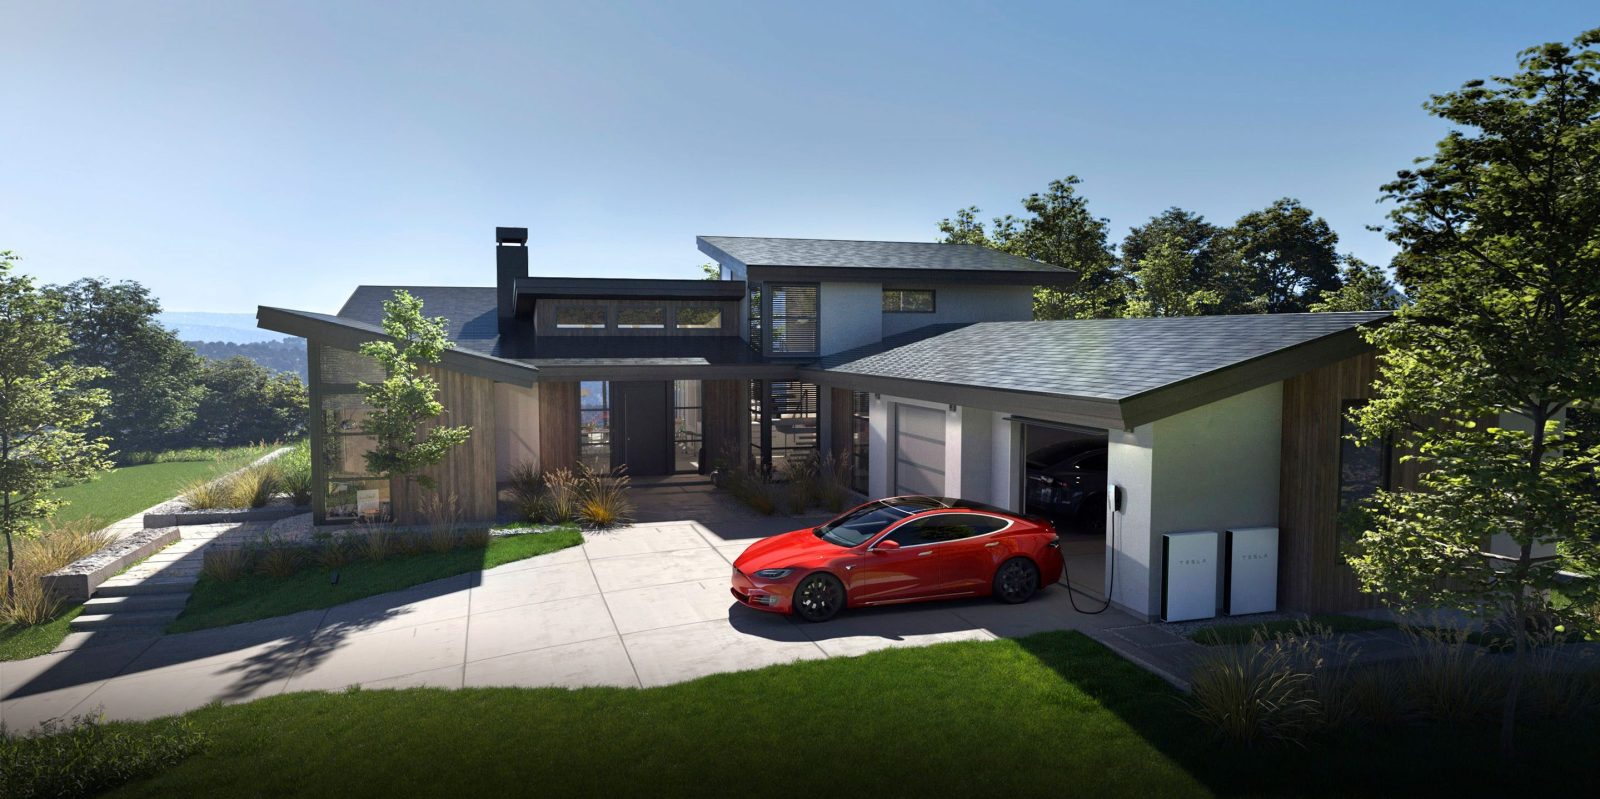 Tesla now requires Powerwall for every solar roof project and more